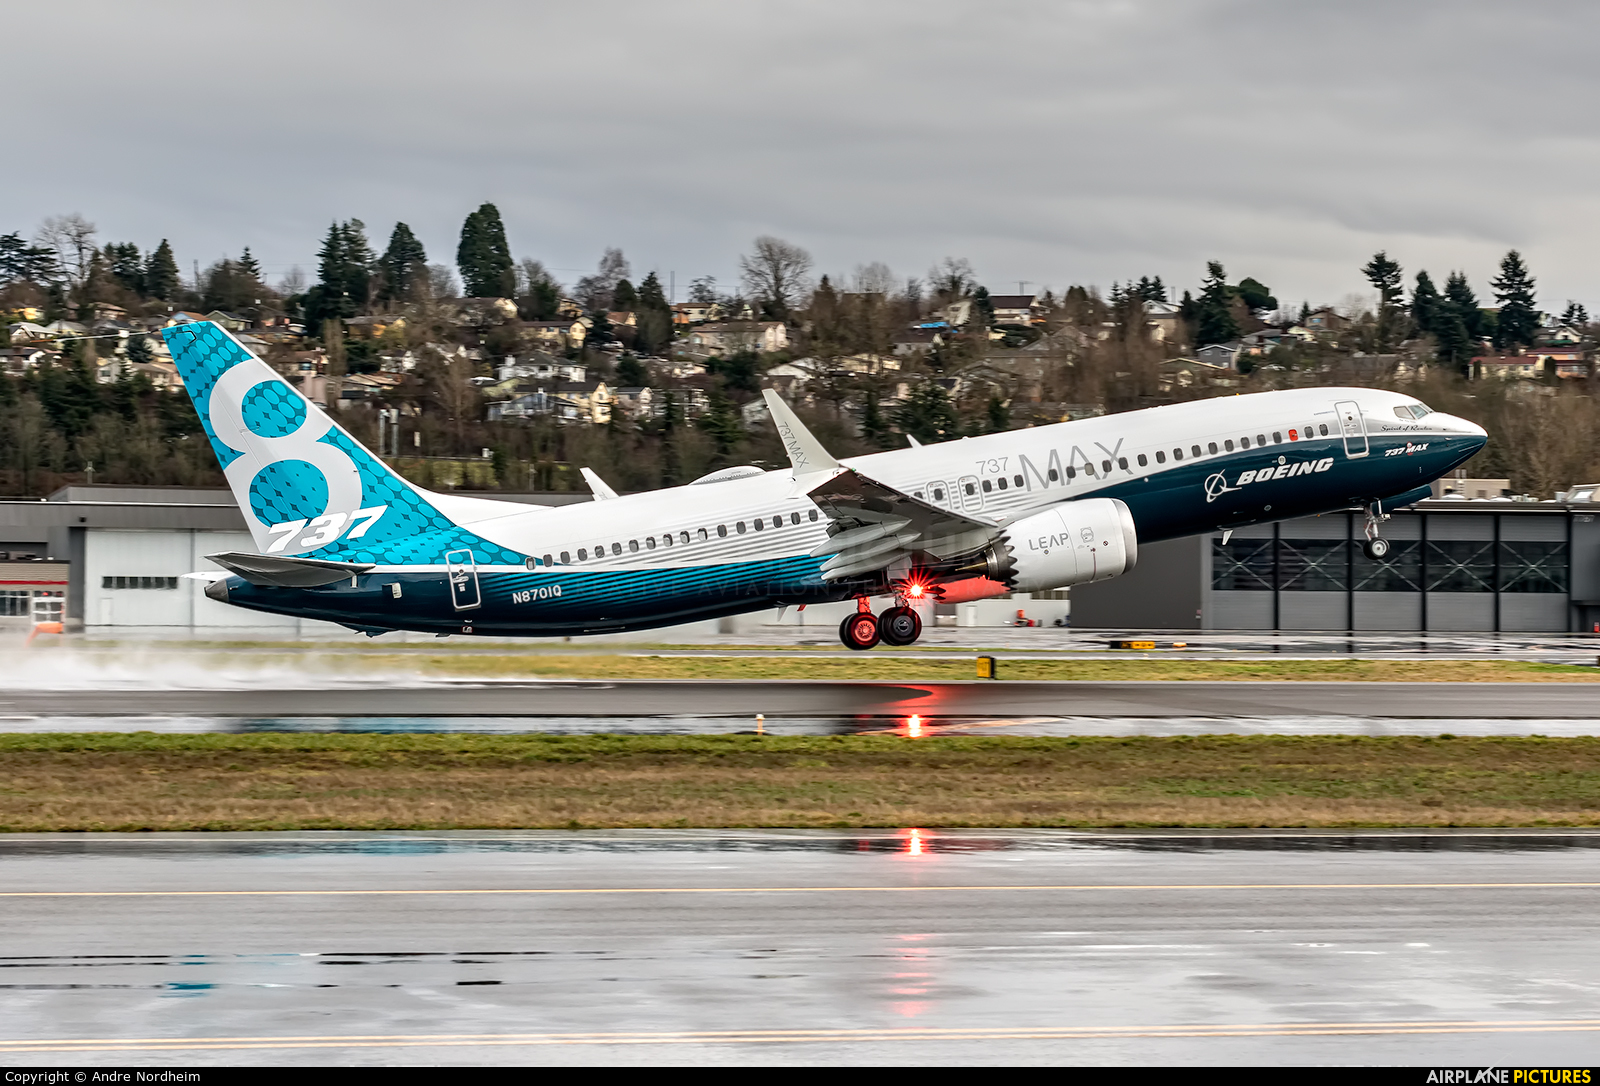 Boeing Company N8701Q aircraft at Seattle - Boeing Field / King County Intl